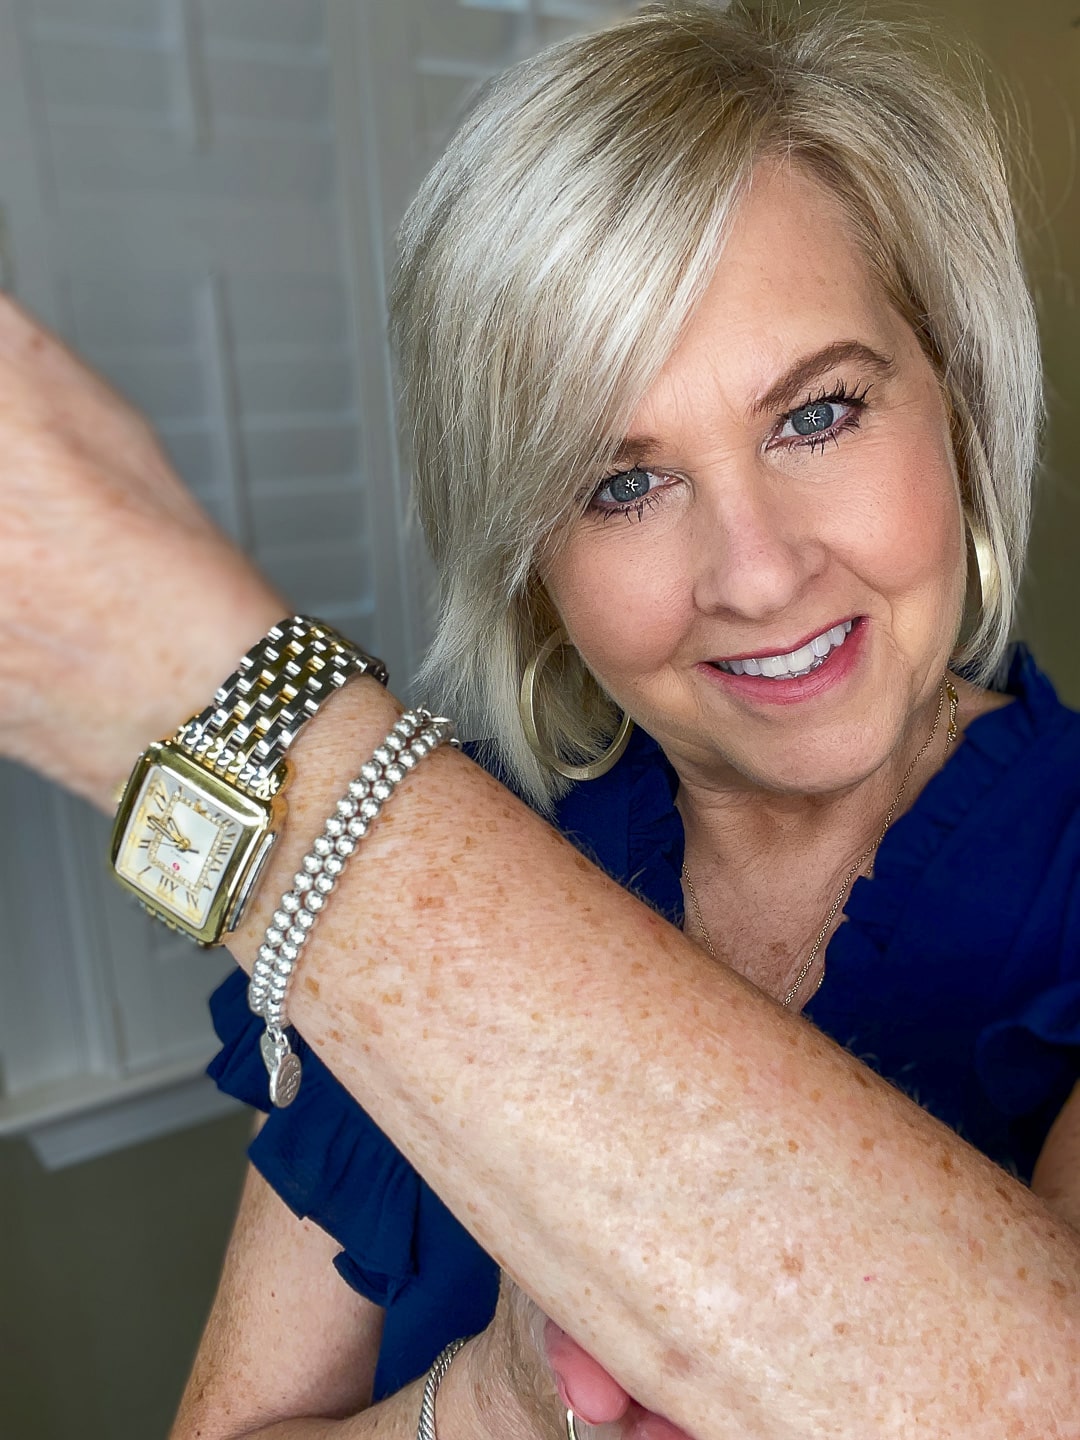 Over 40 Fashion Blogger, Tania Stephens is wearing a blue top and trying City Beauty's Inviscrepe Body Balm13